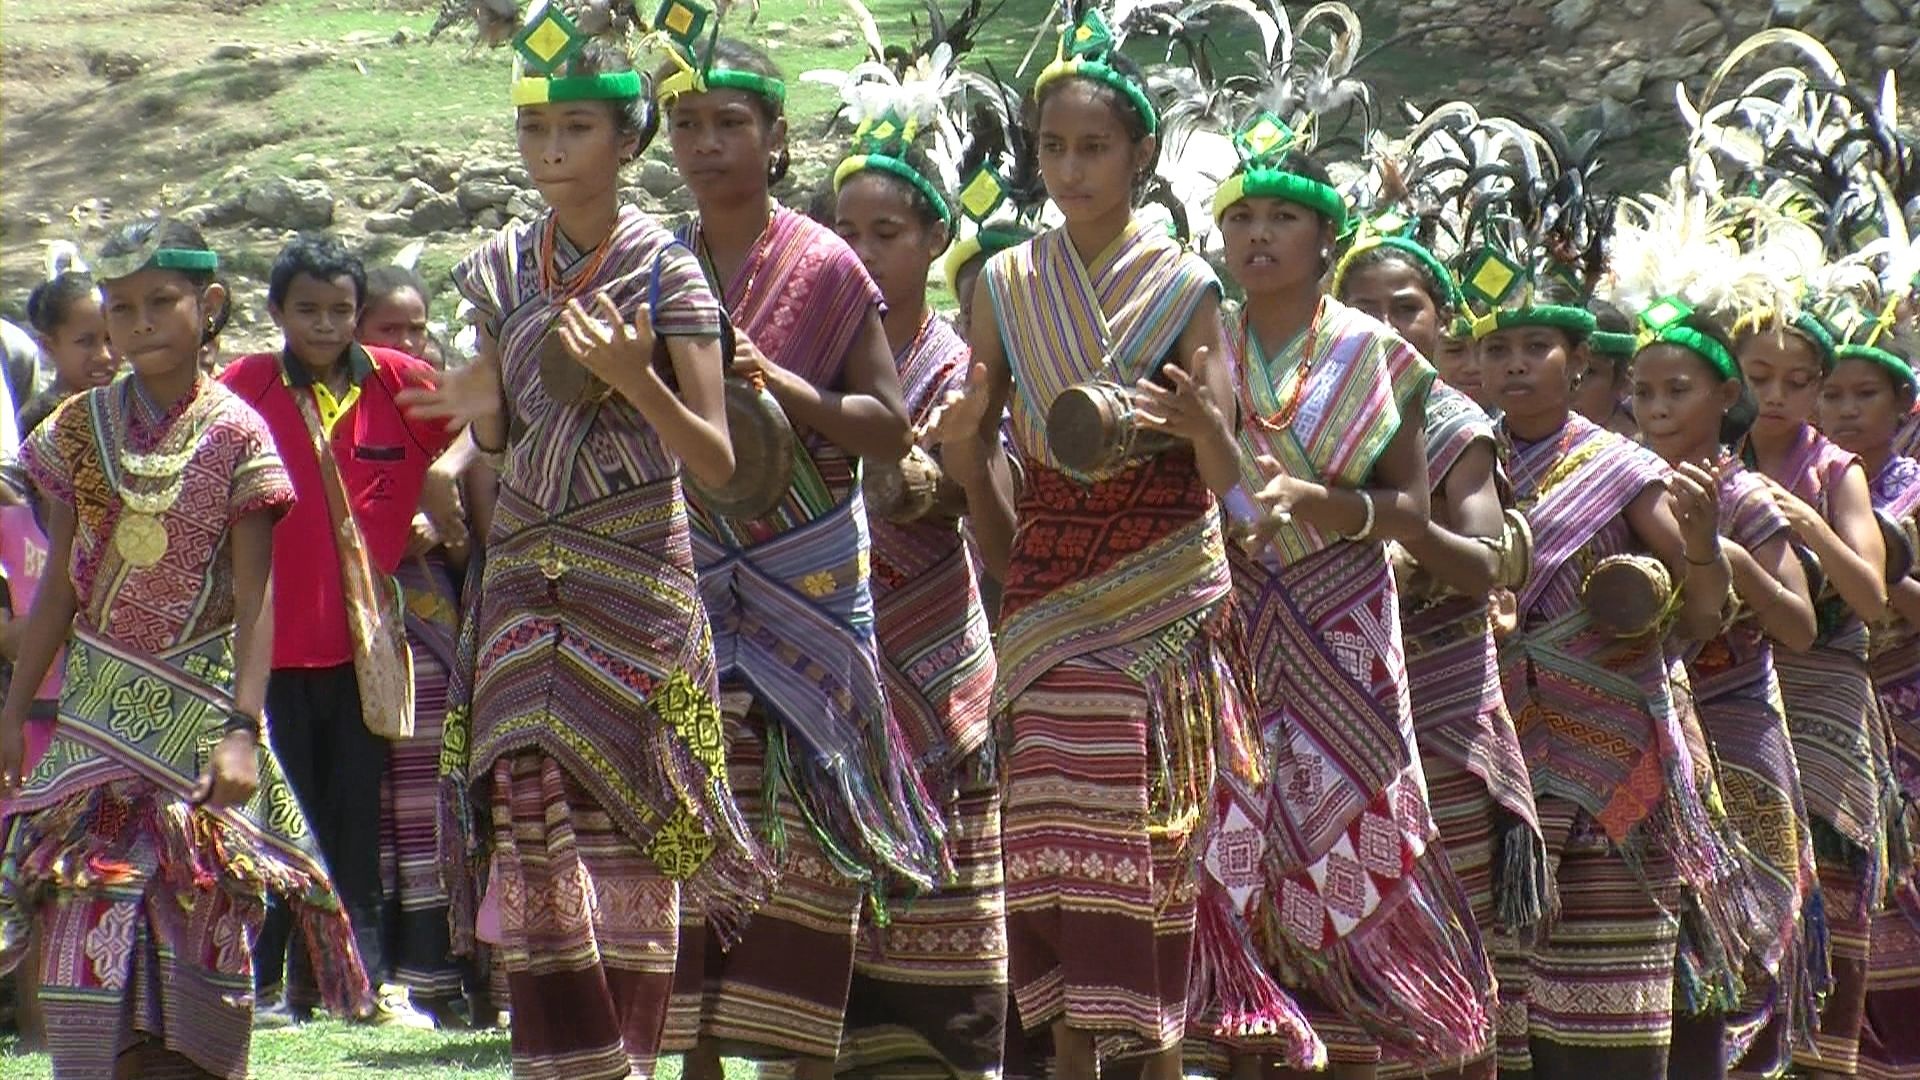 Tebedai at Timor-Leste, Timor culture, Traditional practices, Cultural heritage, 1920x1080 Full HD Desktop